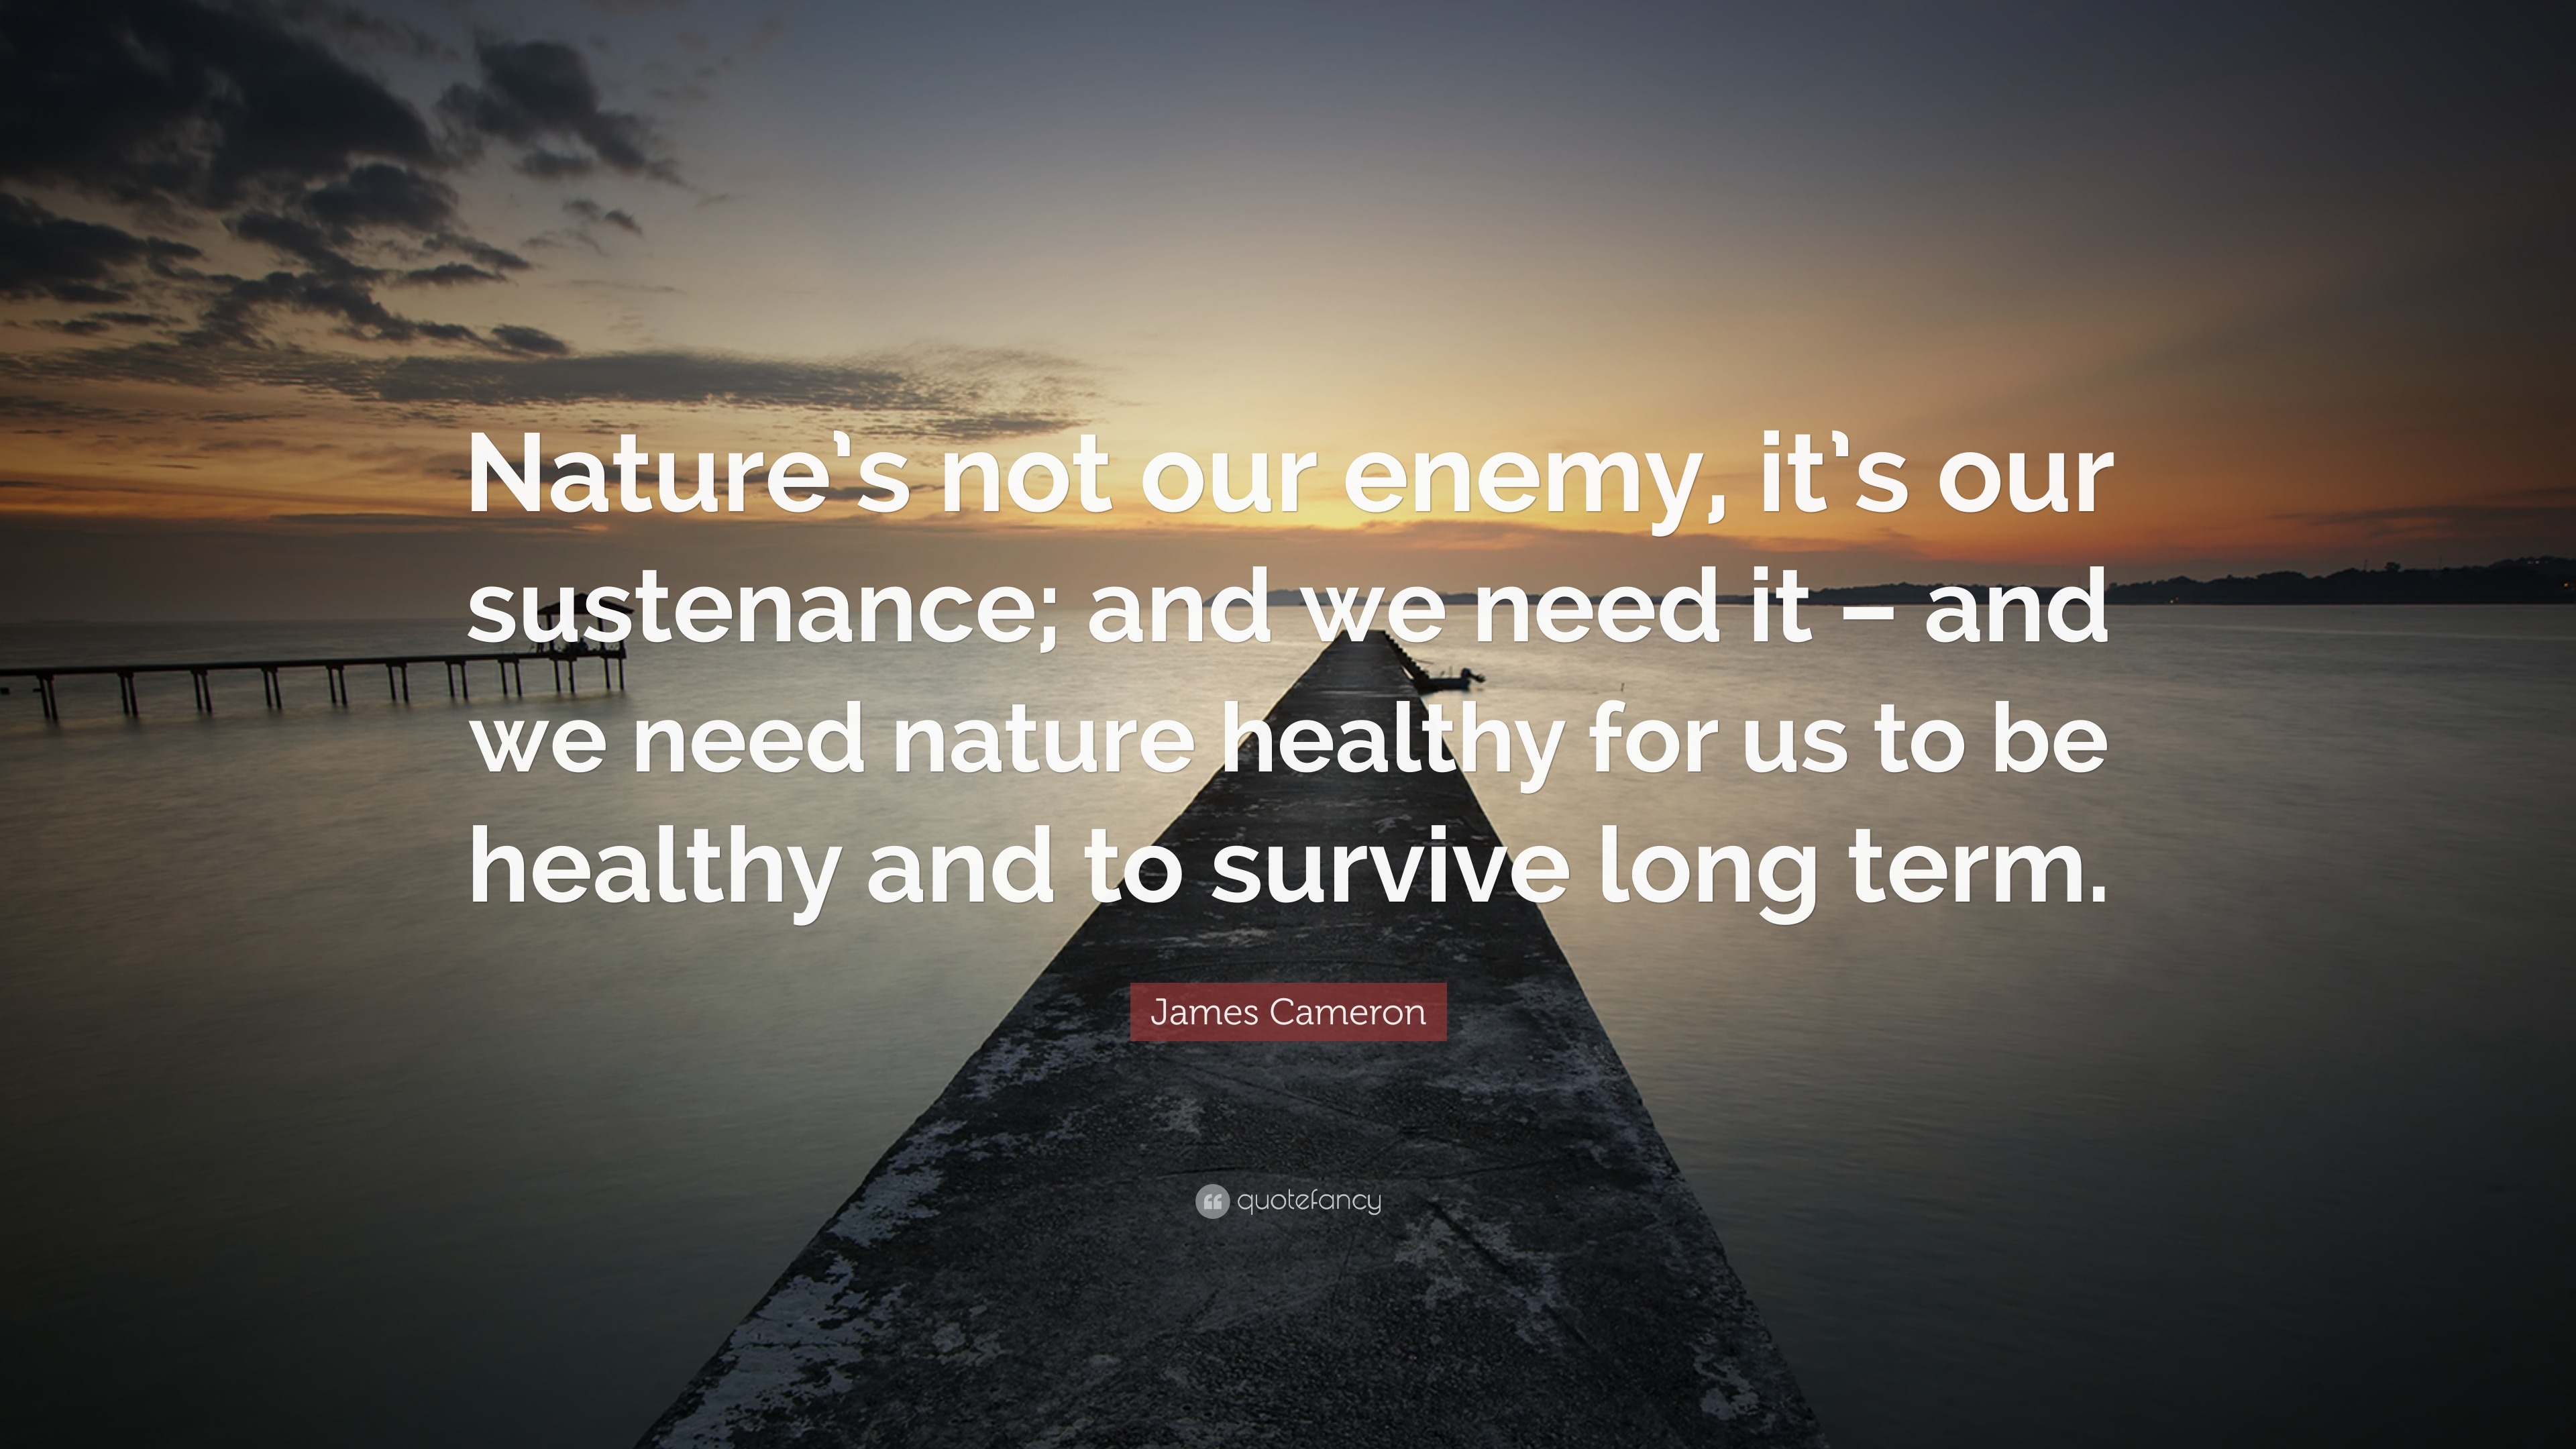 jernbane Sovesal Gymnast James Cameron Quote: “Nature's not our enemy, it's our sustenance; and we  need it – and we need nature healthy for us to be healthy and to sur...”